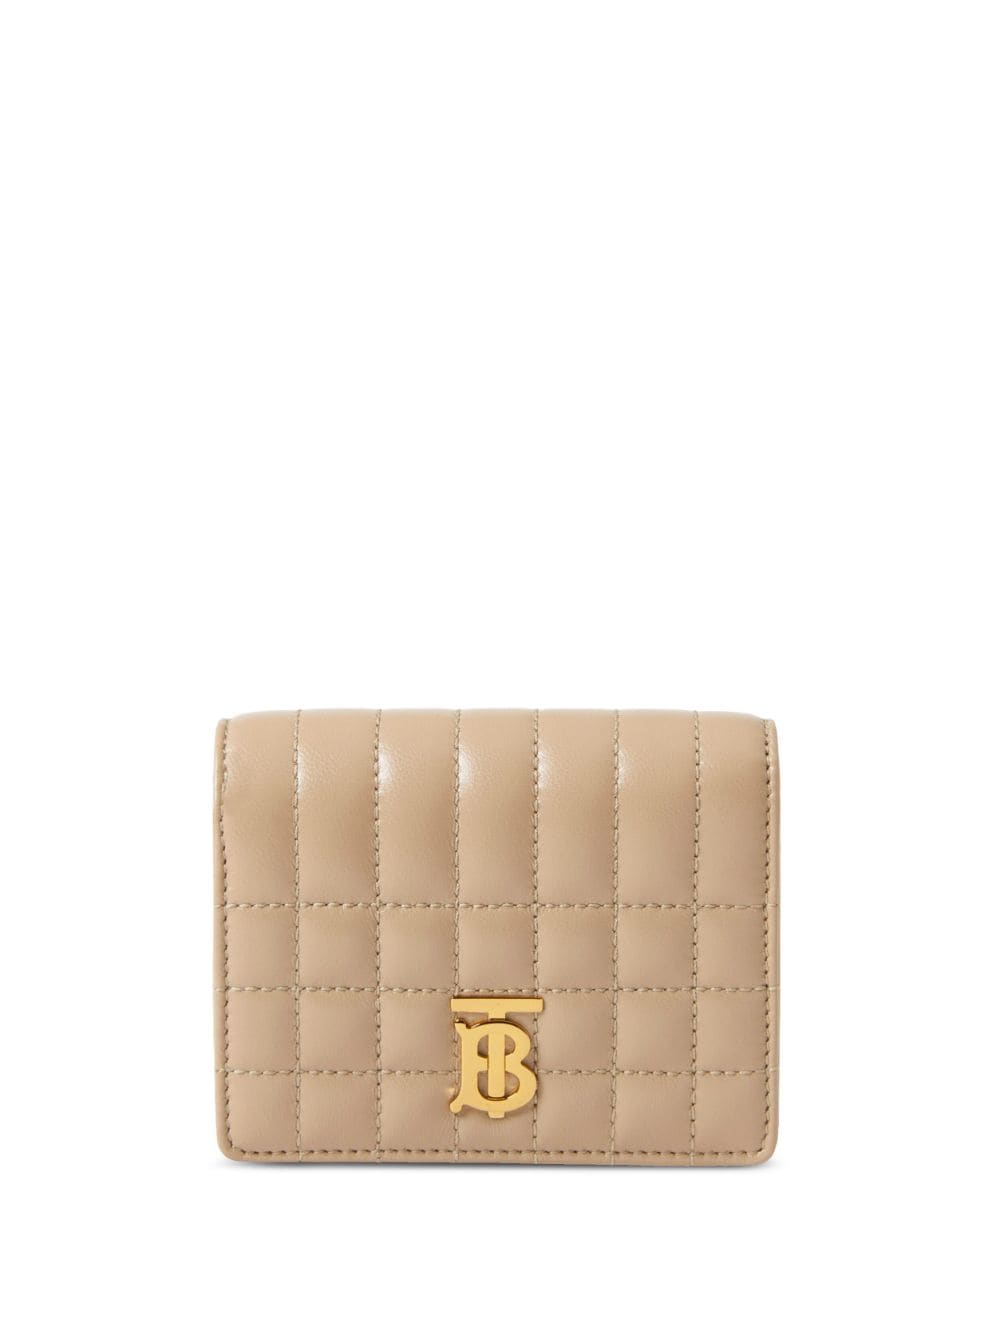 Burberry Small Quilted Leather Folding Wallet In Nude